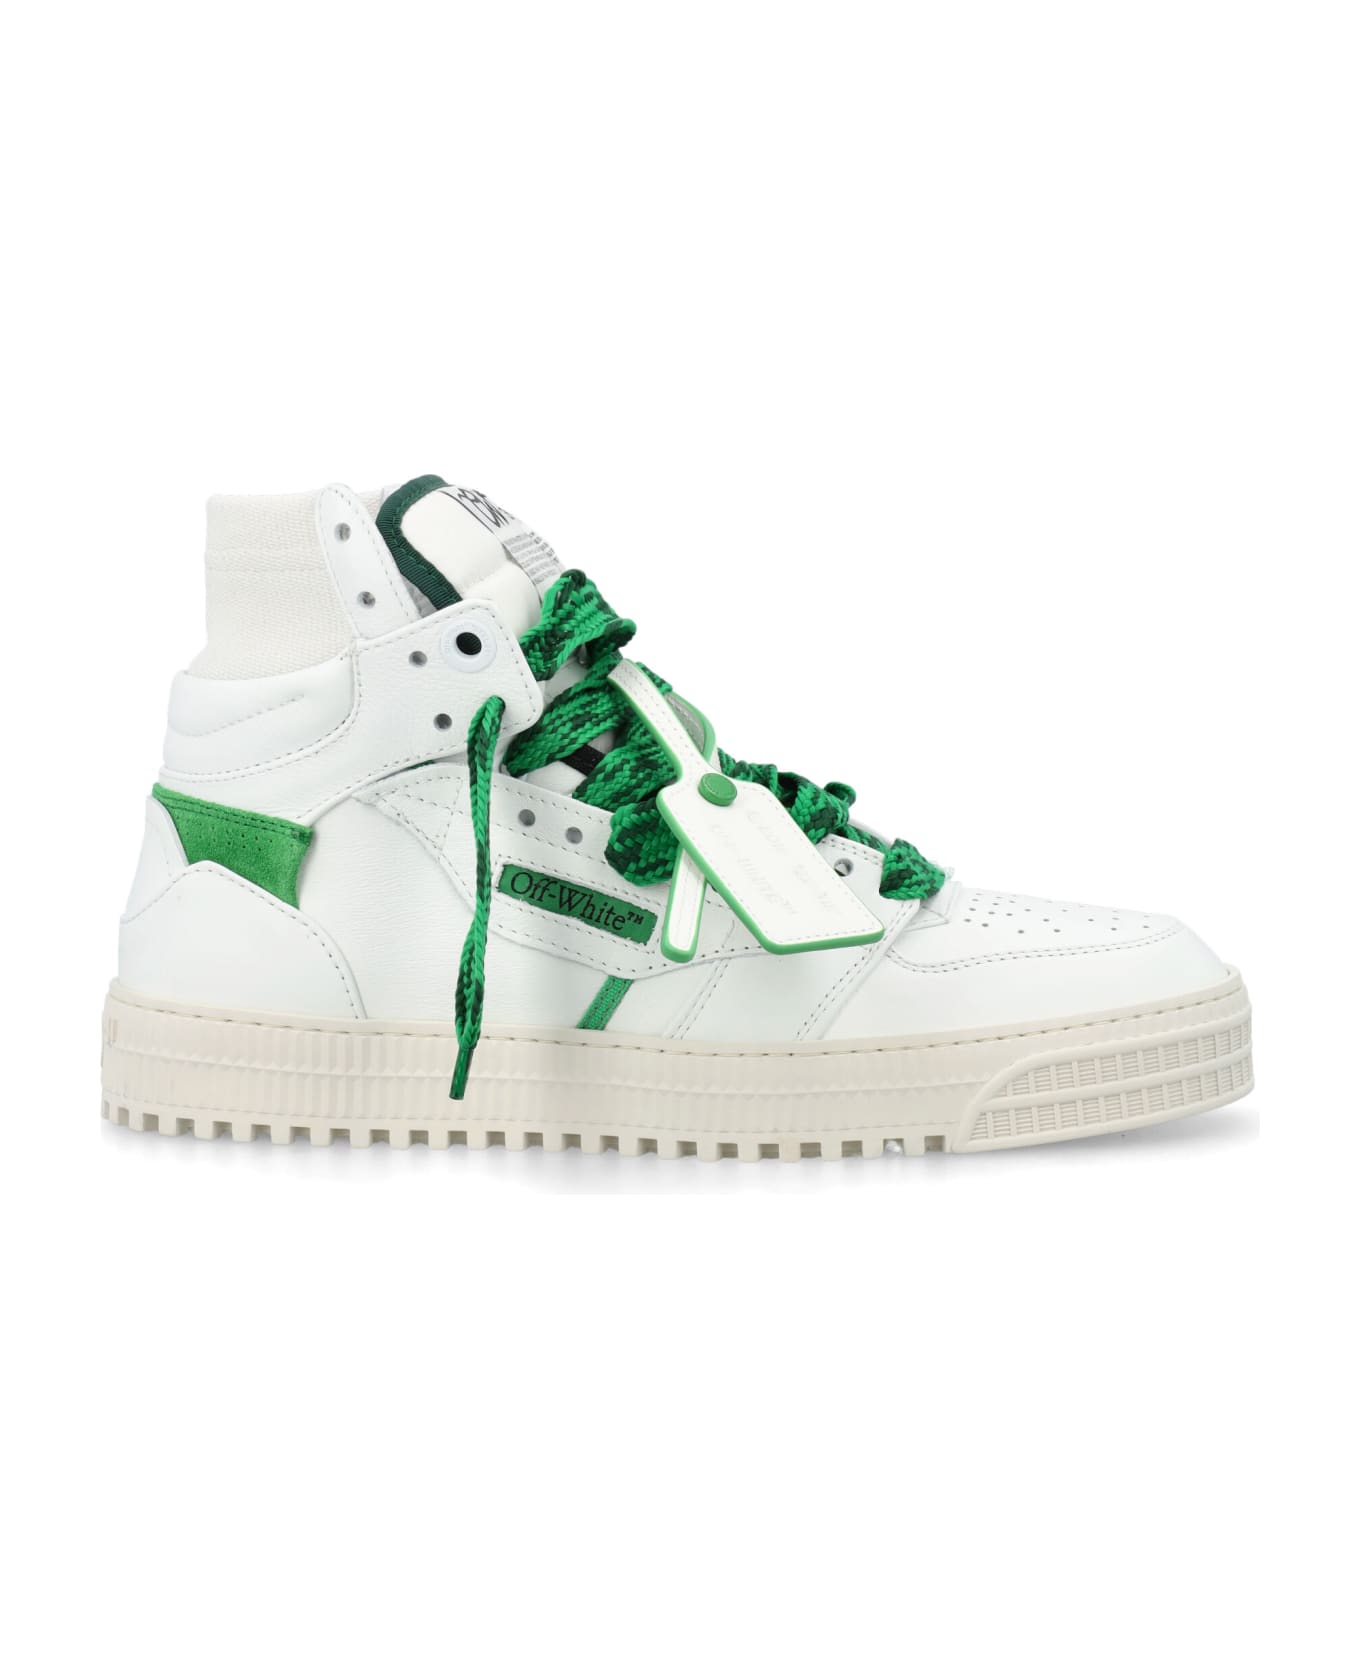 Off-White 3.0 Off Court High Top Sneakers - WHITE GREEN